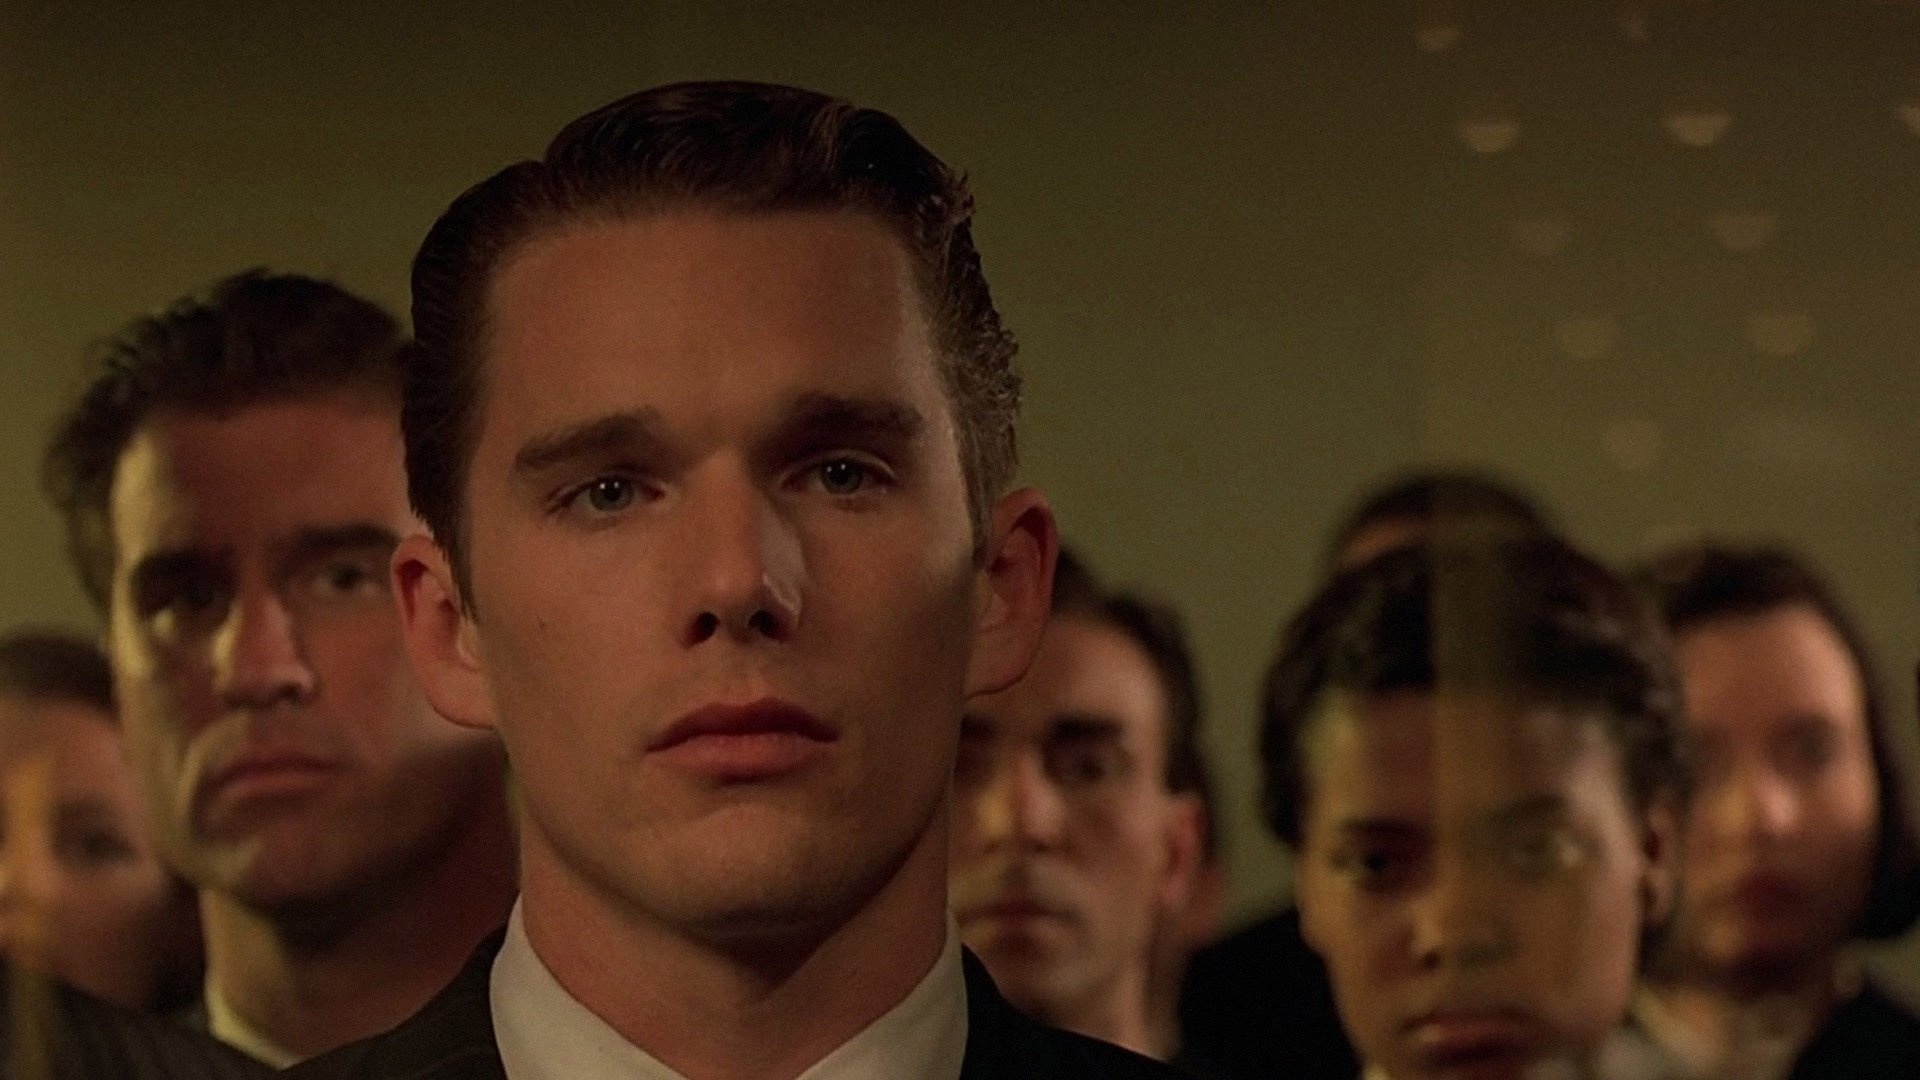 Gattaca: The film presents a biopunk vision of a future society driven by eugenics. 1920x1080 Full HD Background.